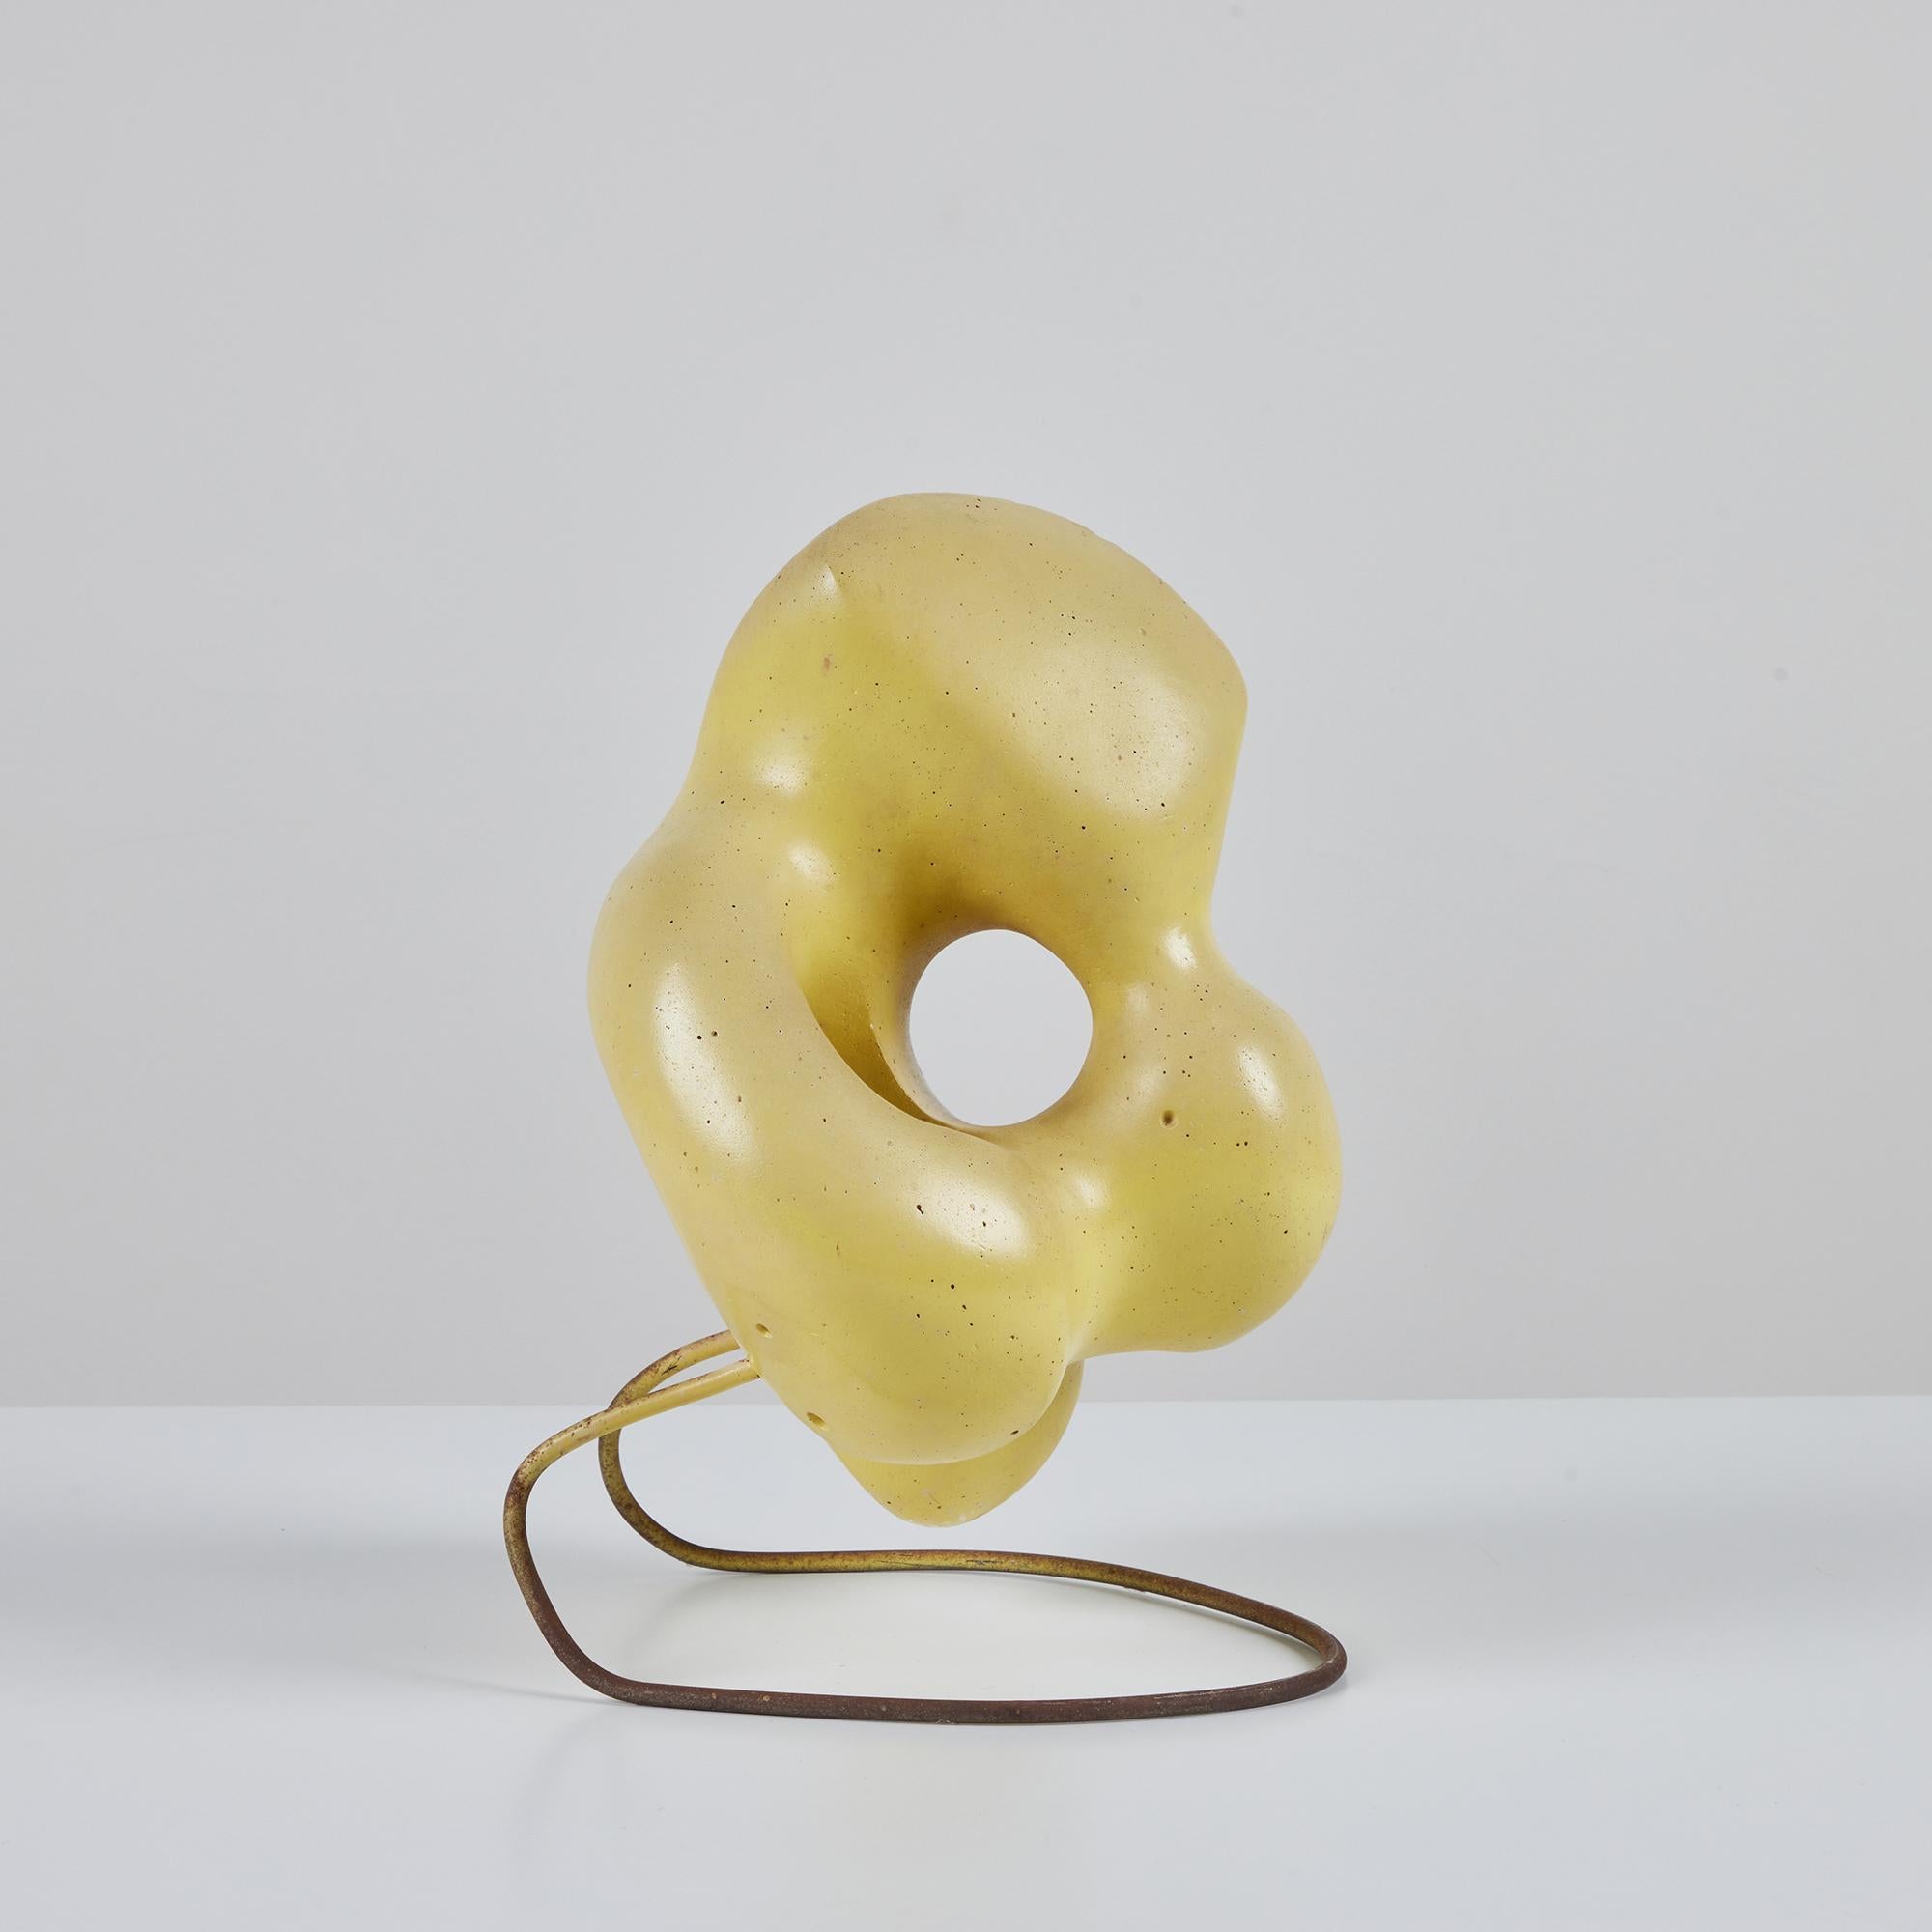 Biomorphic plaster sculpture supported by a curved metal base. This sculpture features soft curves and a pale yellow glaze. 

Dimensions
9.5